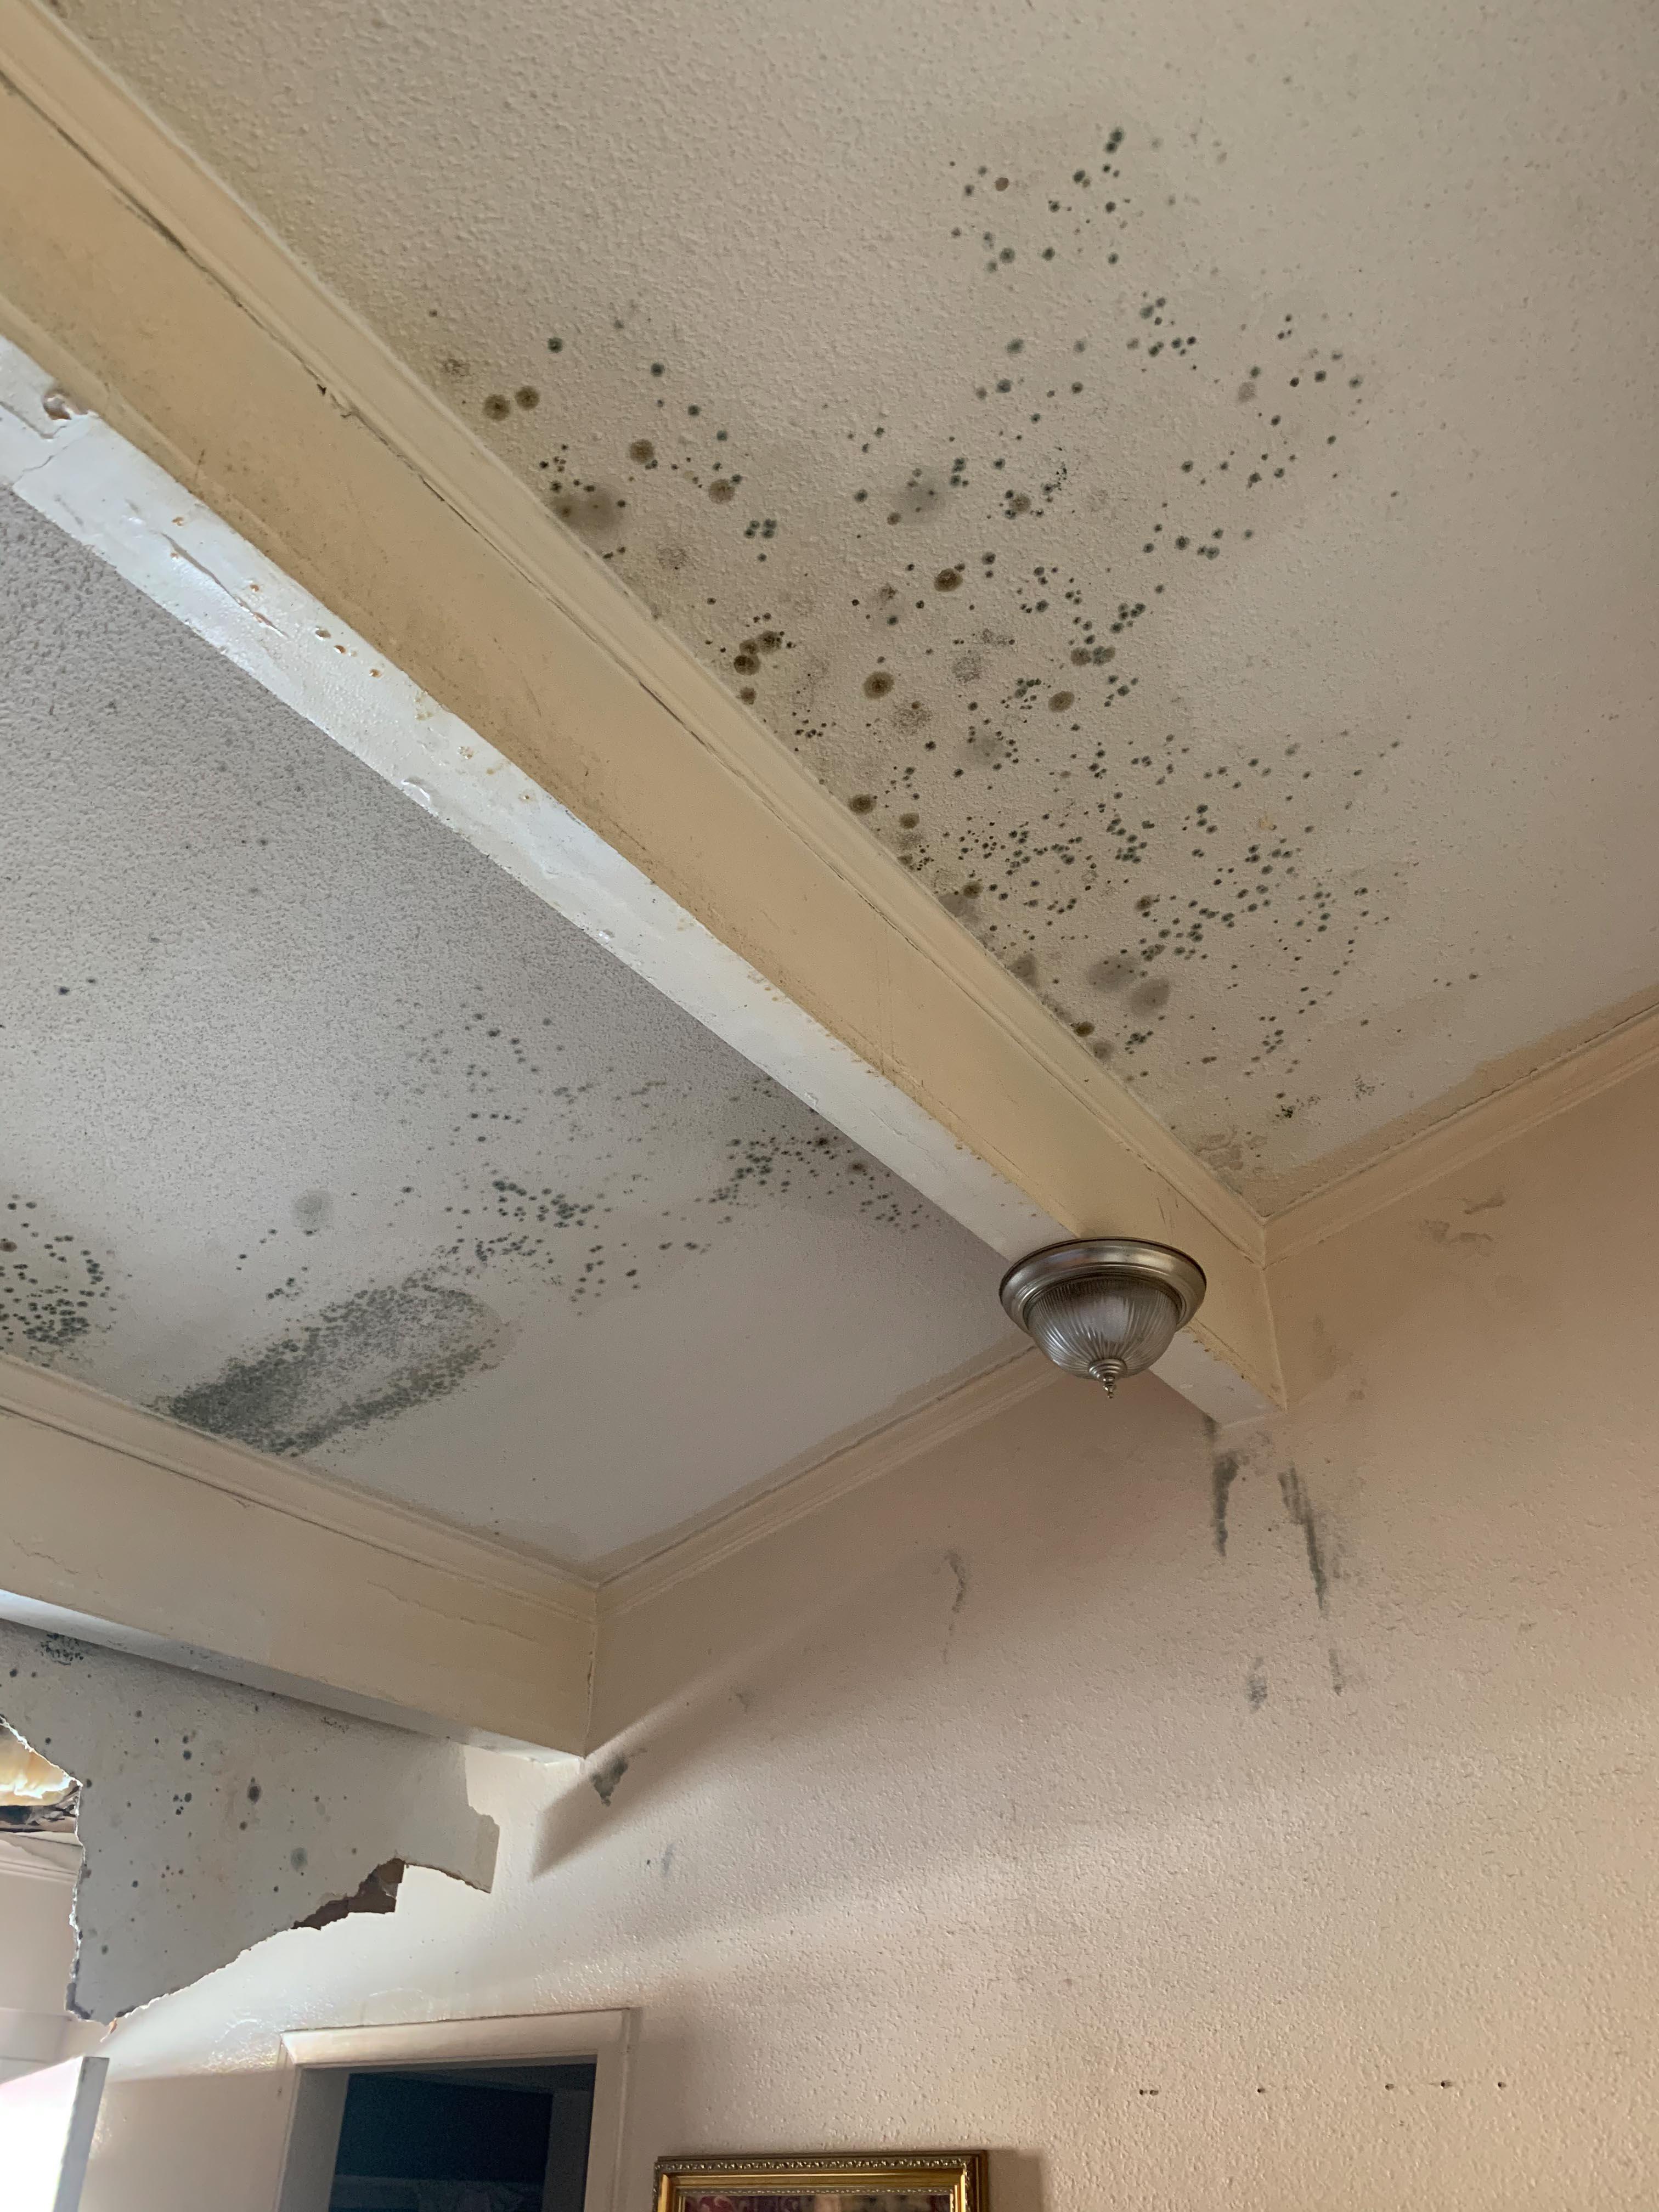 Mold can get out of hand quickly, we have a 24/7 response to any of your mold emergencies.